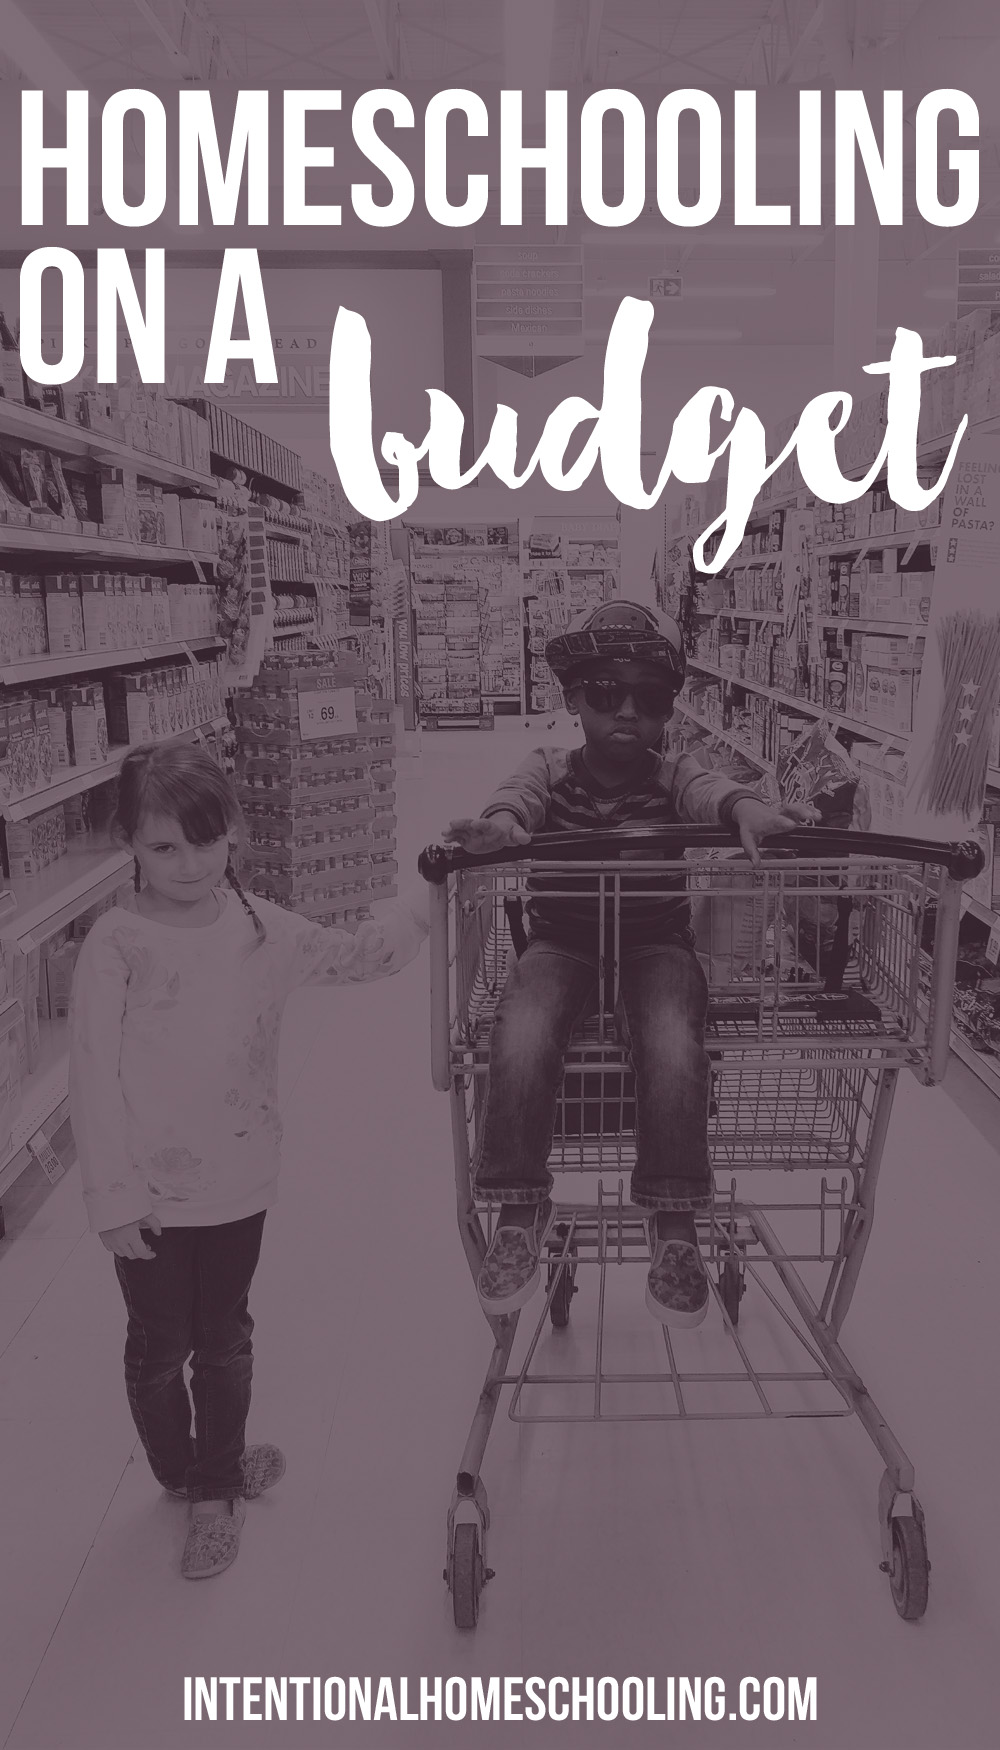 Homeschooling on a Budget - how we do it!